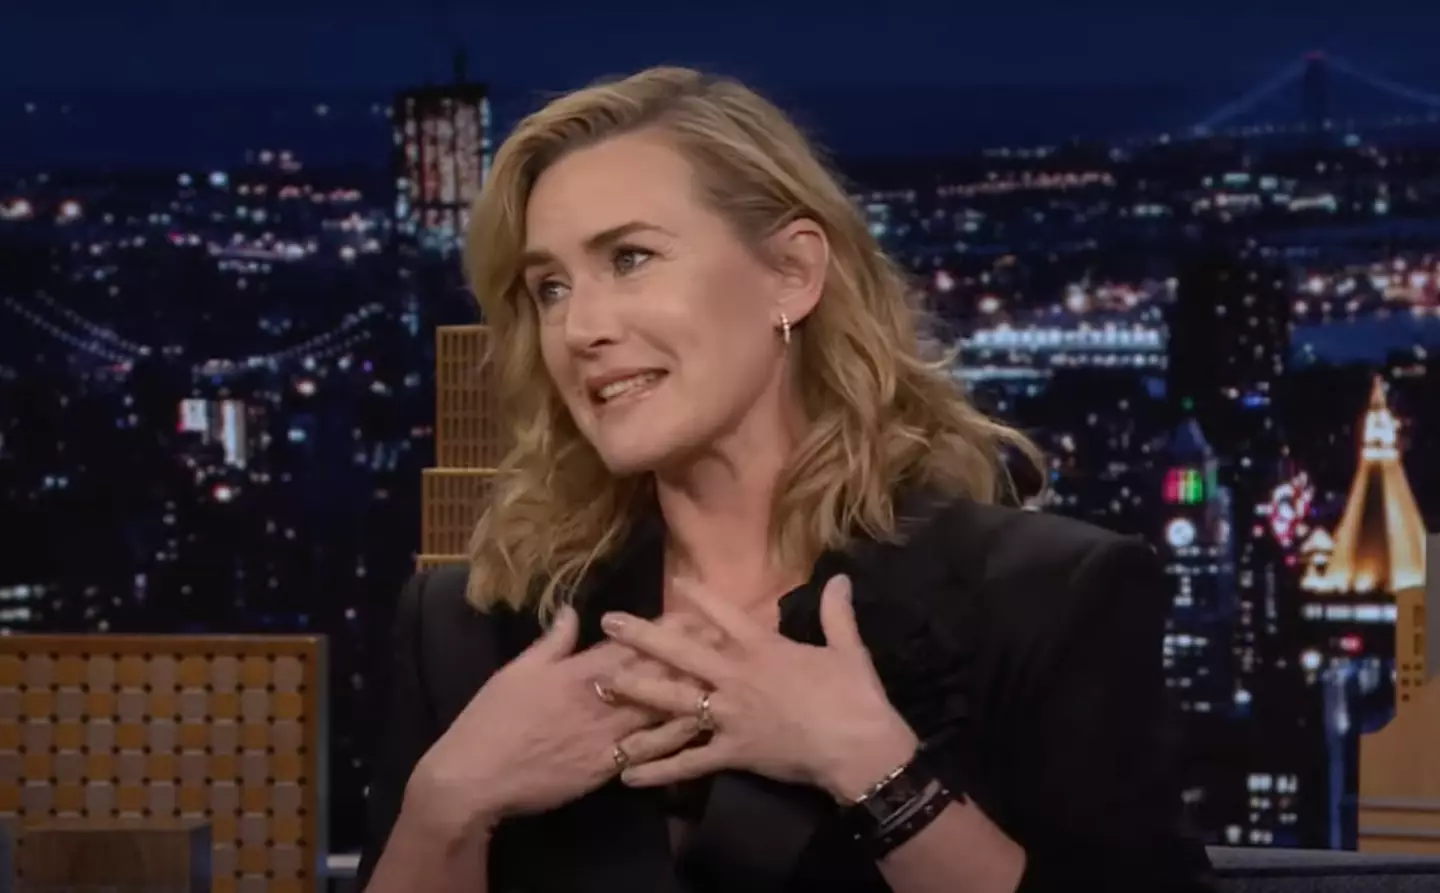 Kate Winslet reflected on her biggest film roles with Jimmy Fallon recently.